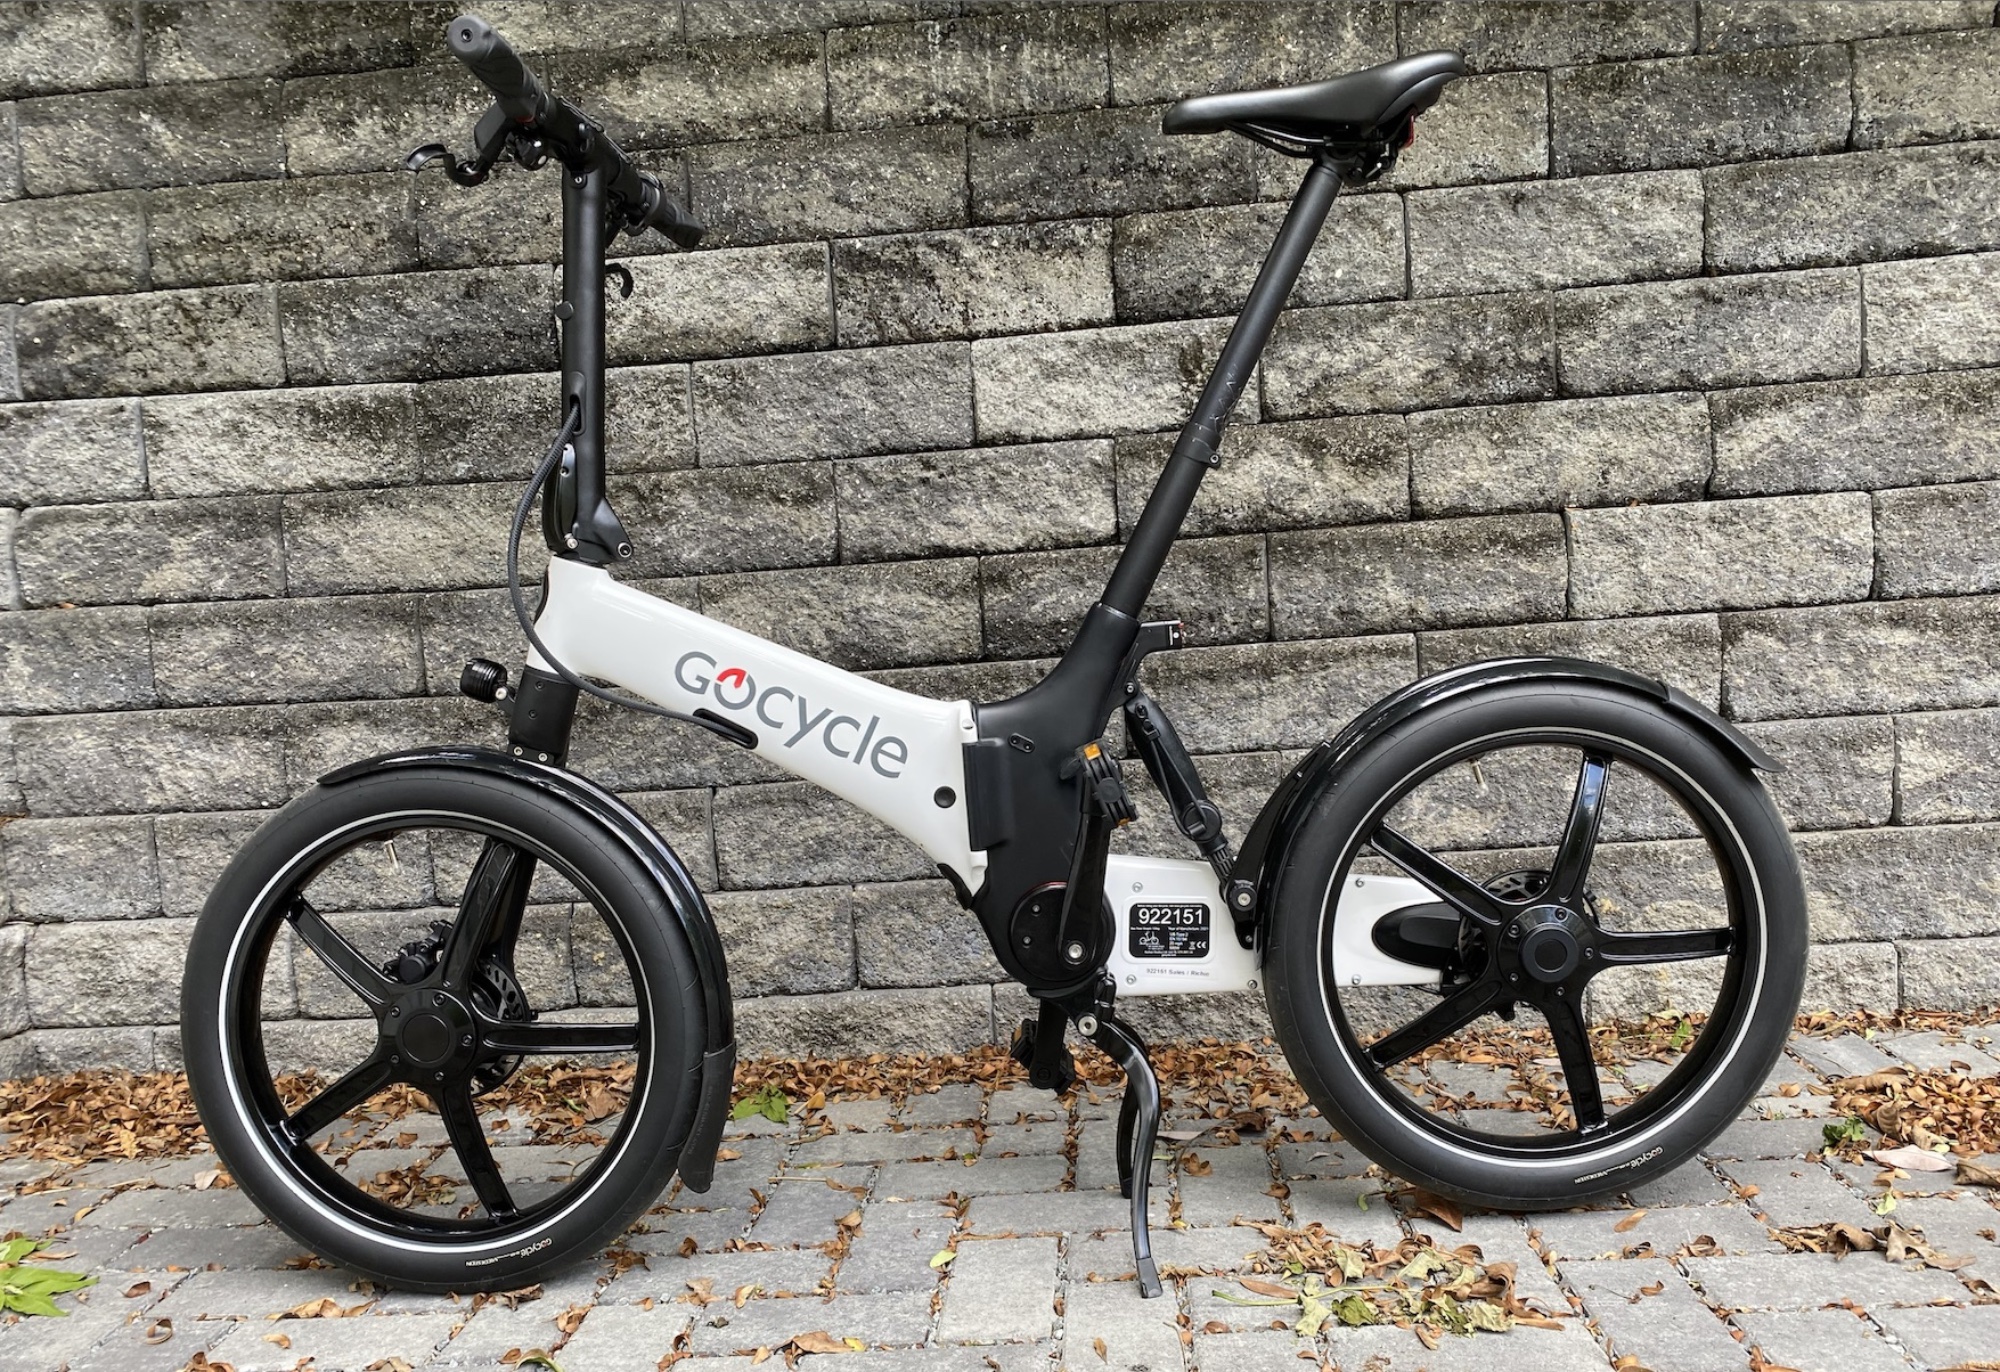 Another view of the Gocycle G4. Note that the chain is fully enclosed to protect any businesswear you might have on during a commute.